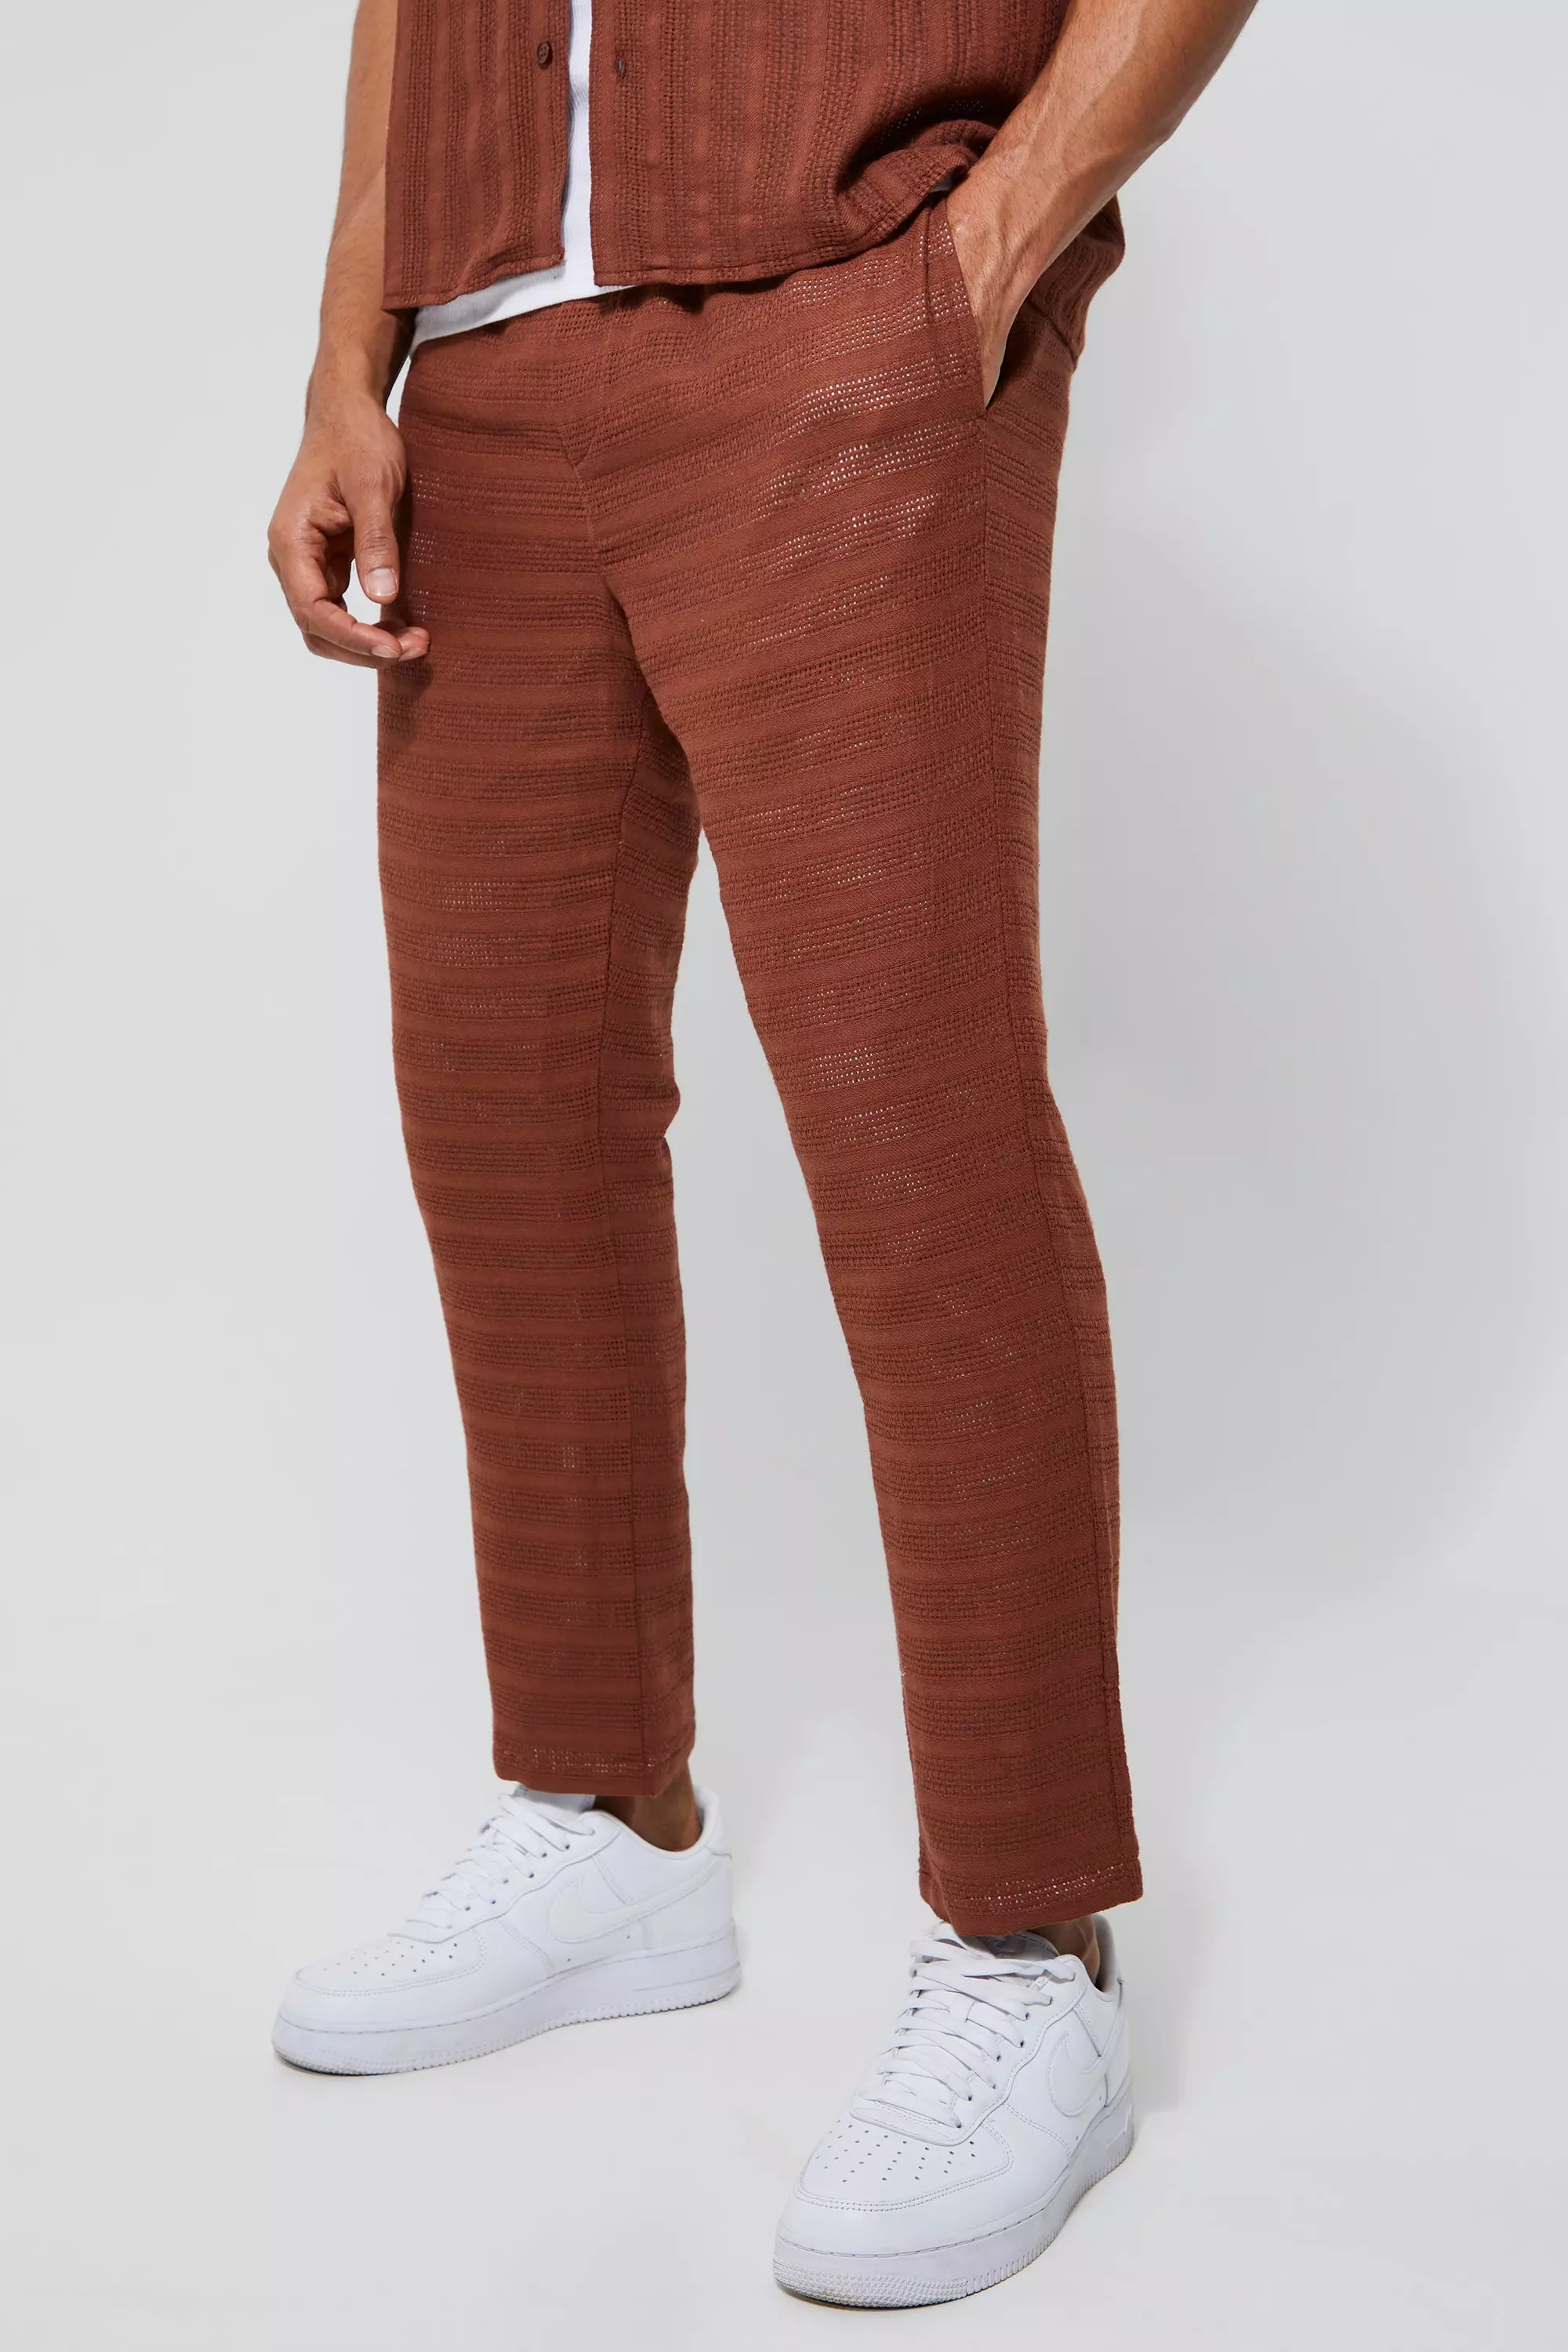 boohooMAN Men's Tapered High Rise Trouser with Belt Loops